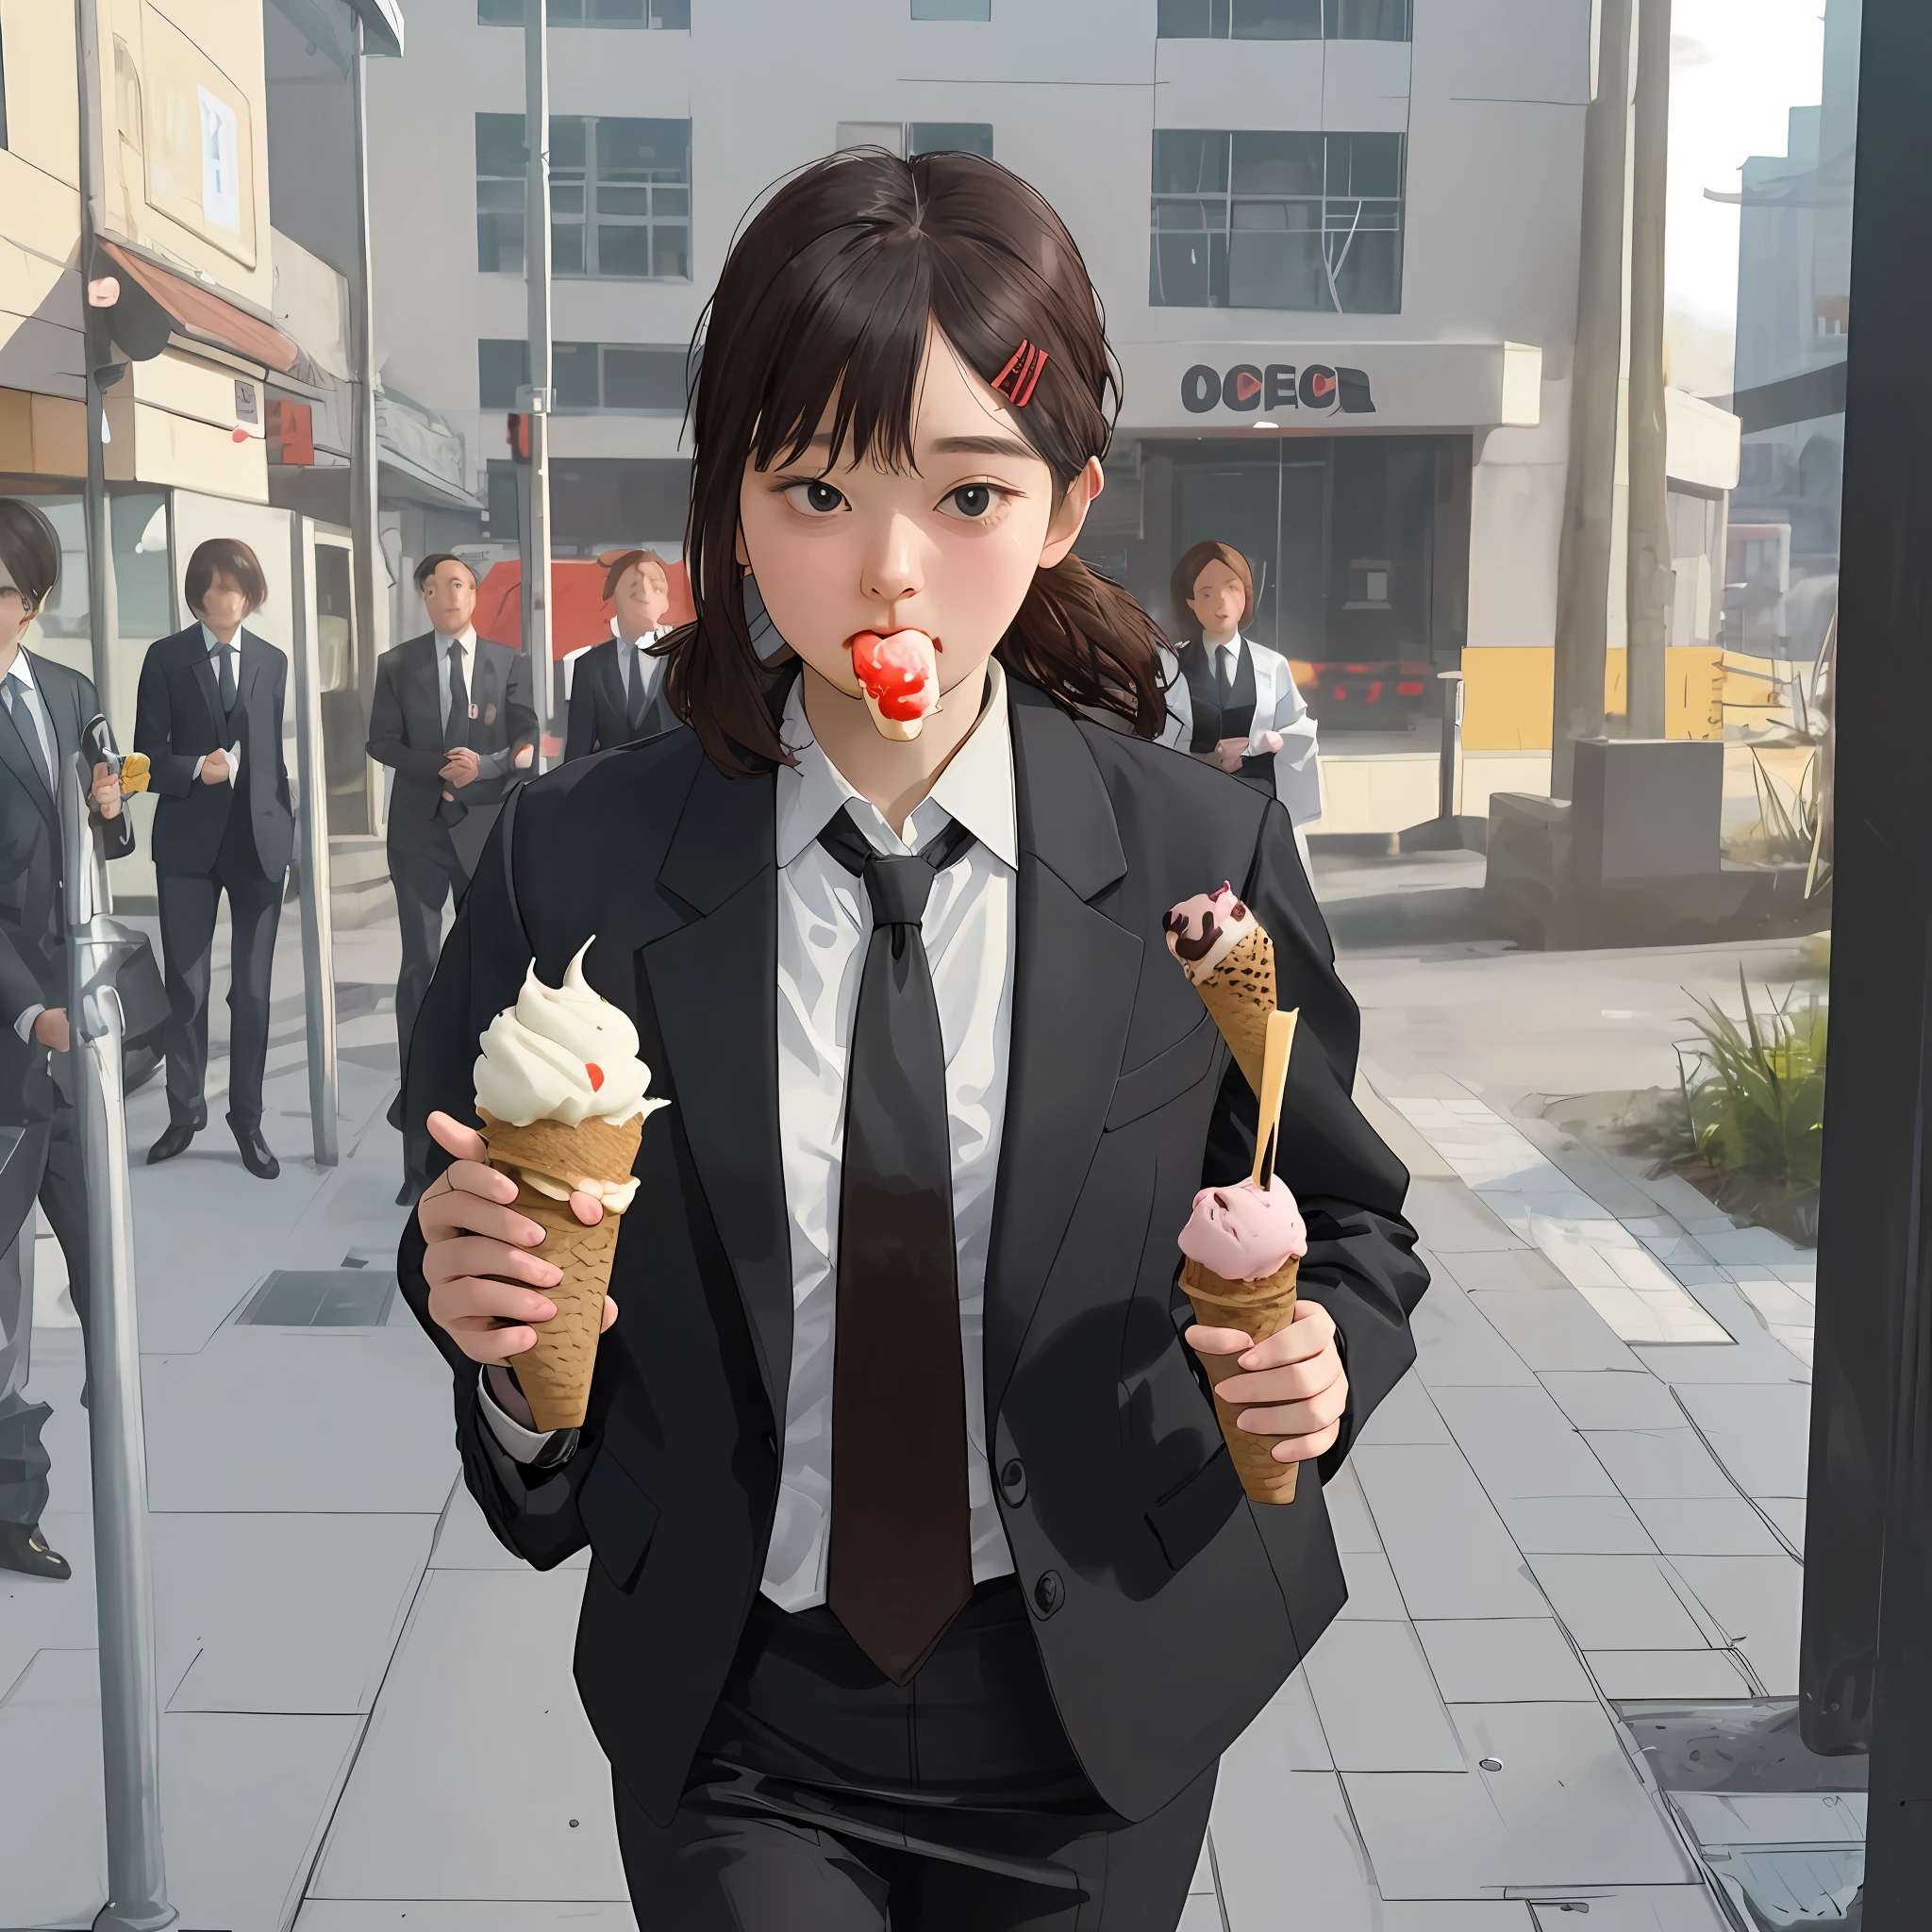 (1 girl) eating an ice cream in a shy way, wearing an office suit, jacket and tie, walking the streets, super detailed, high definition.